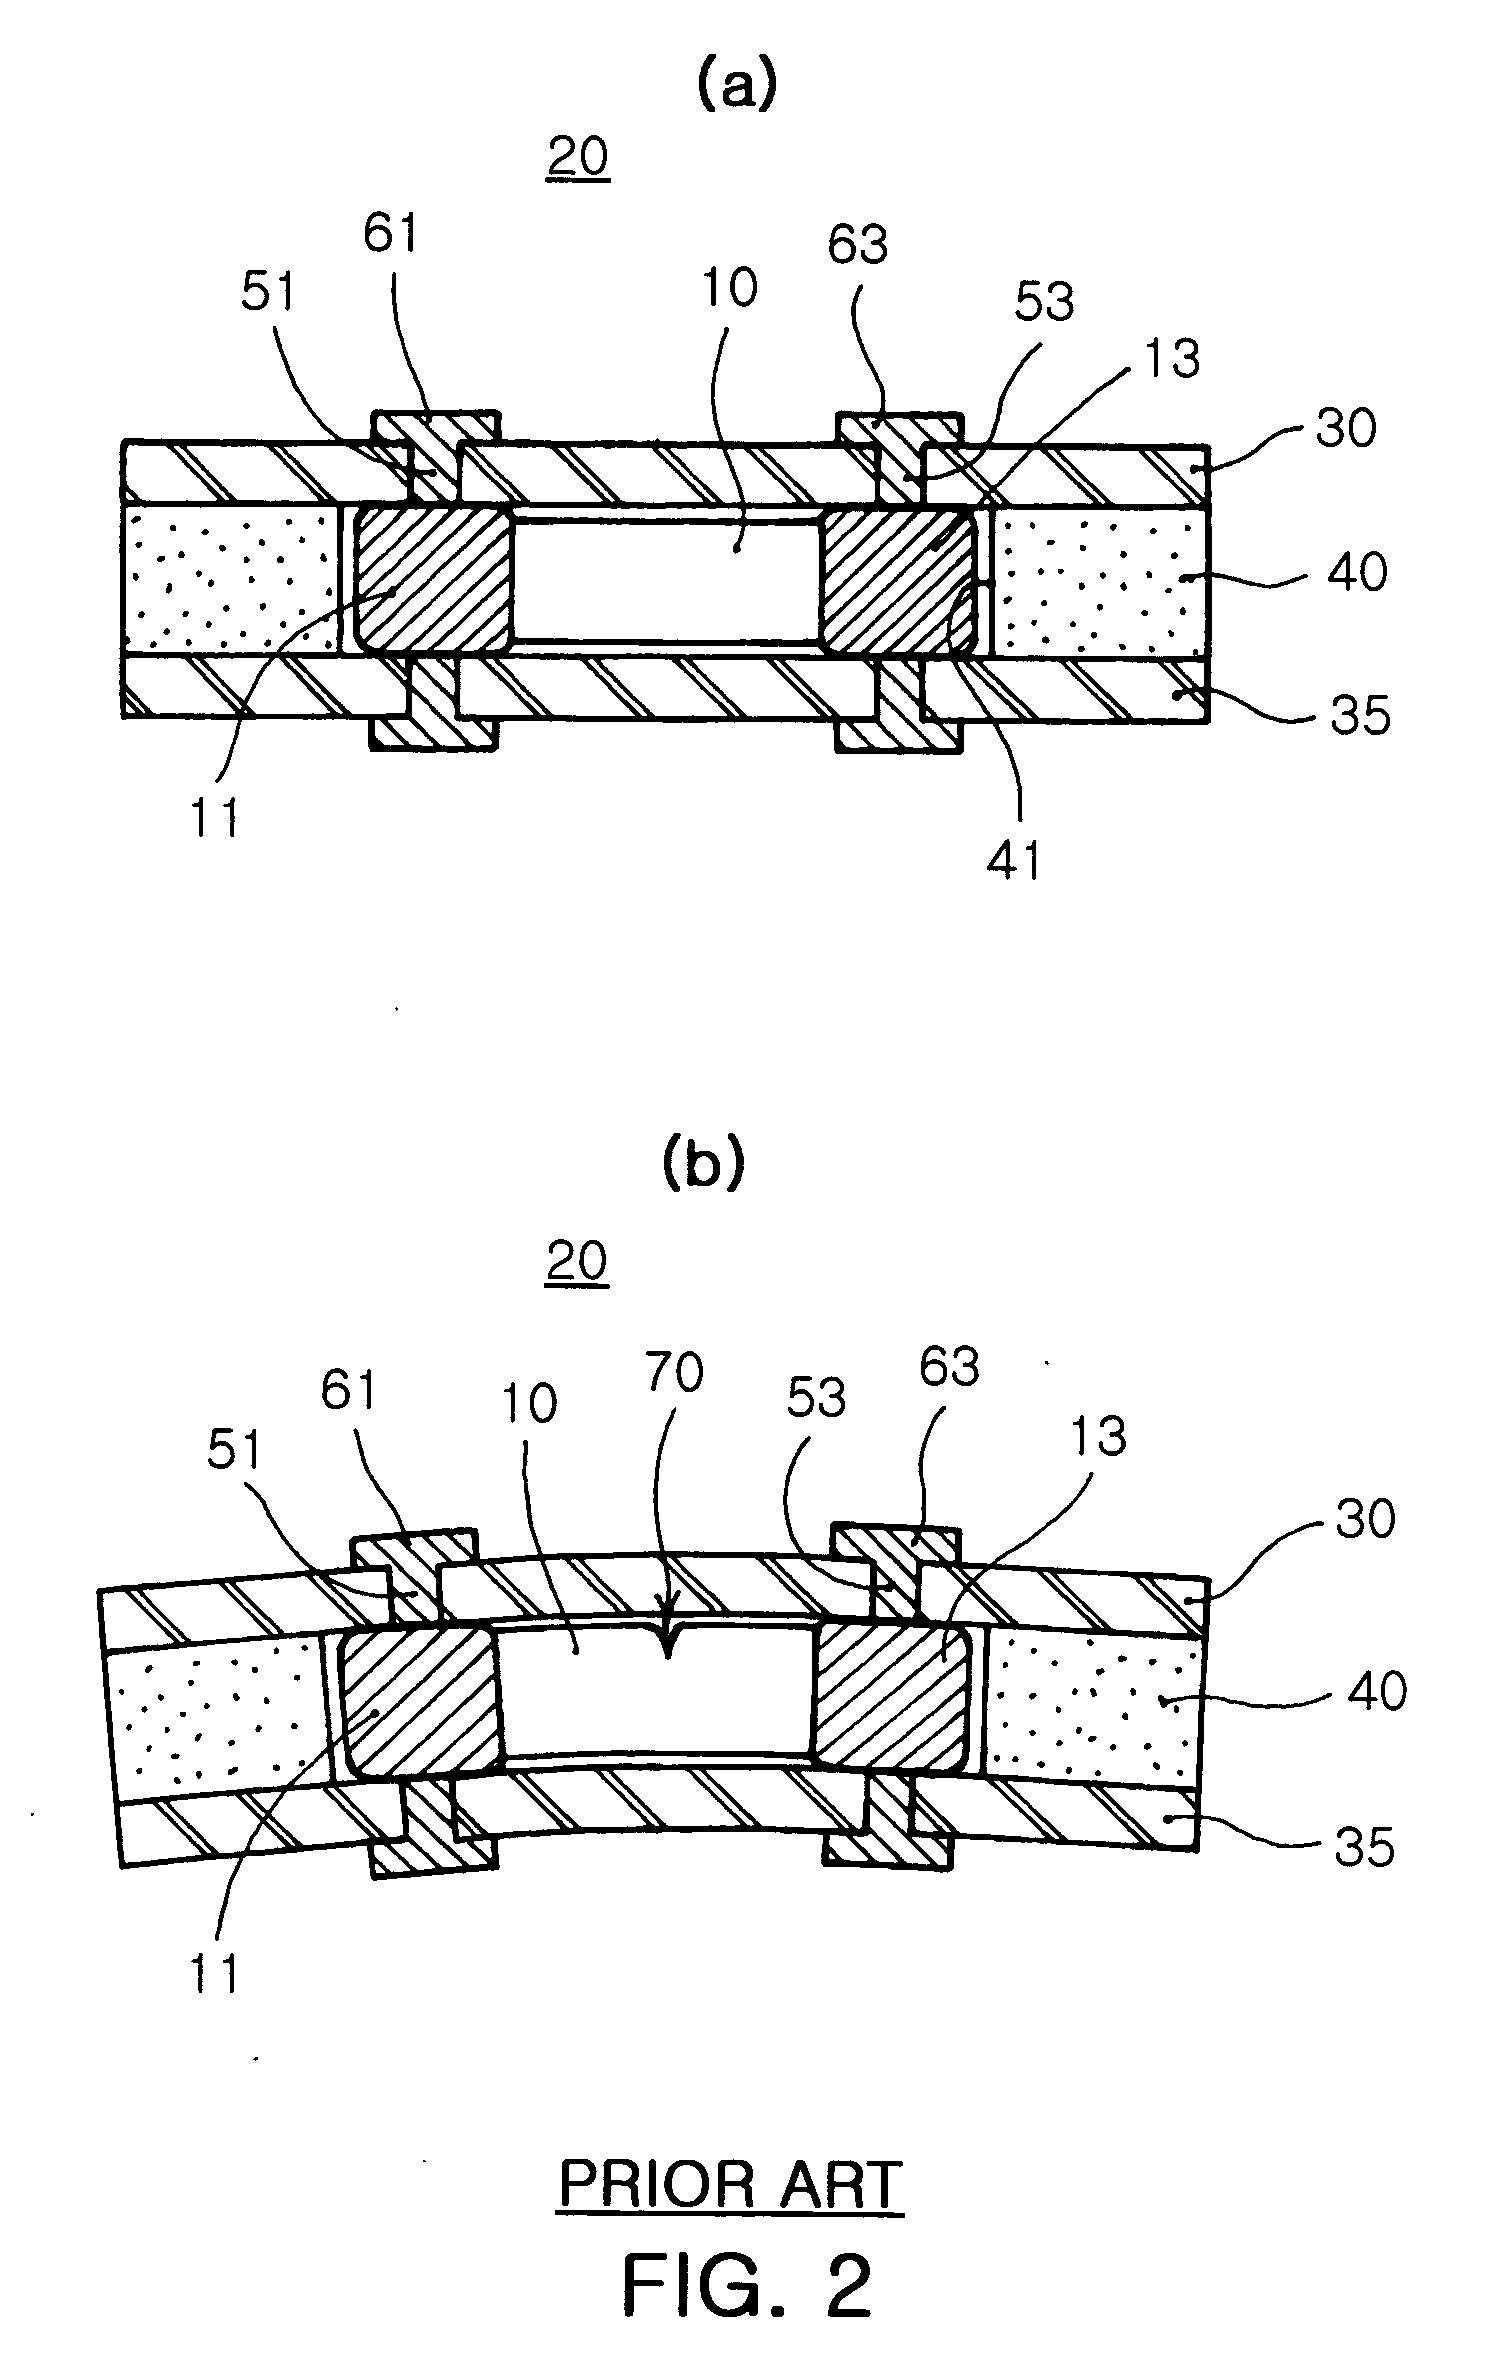 Embedded multilayer chip capacitor and printed circuit board having the same